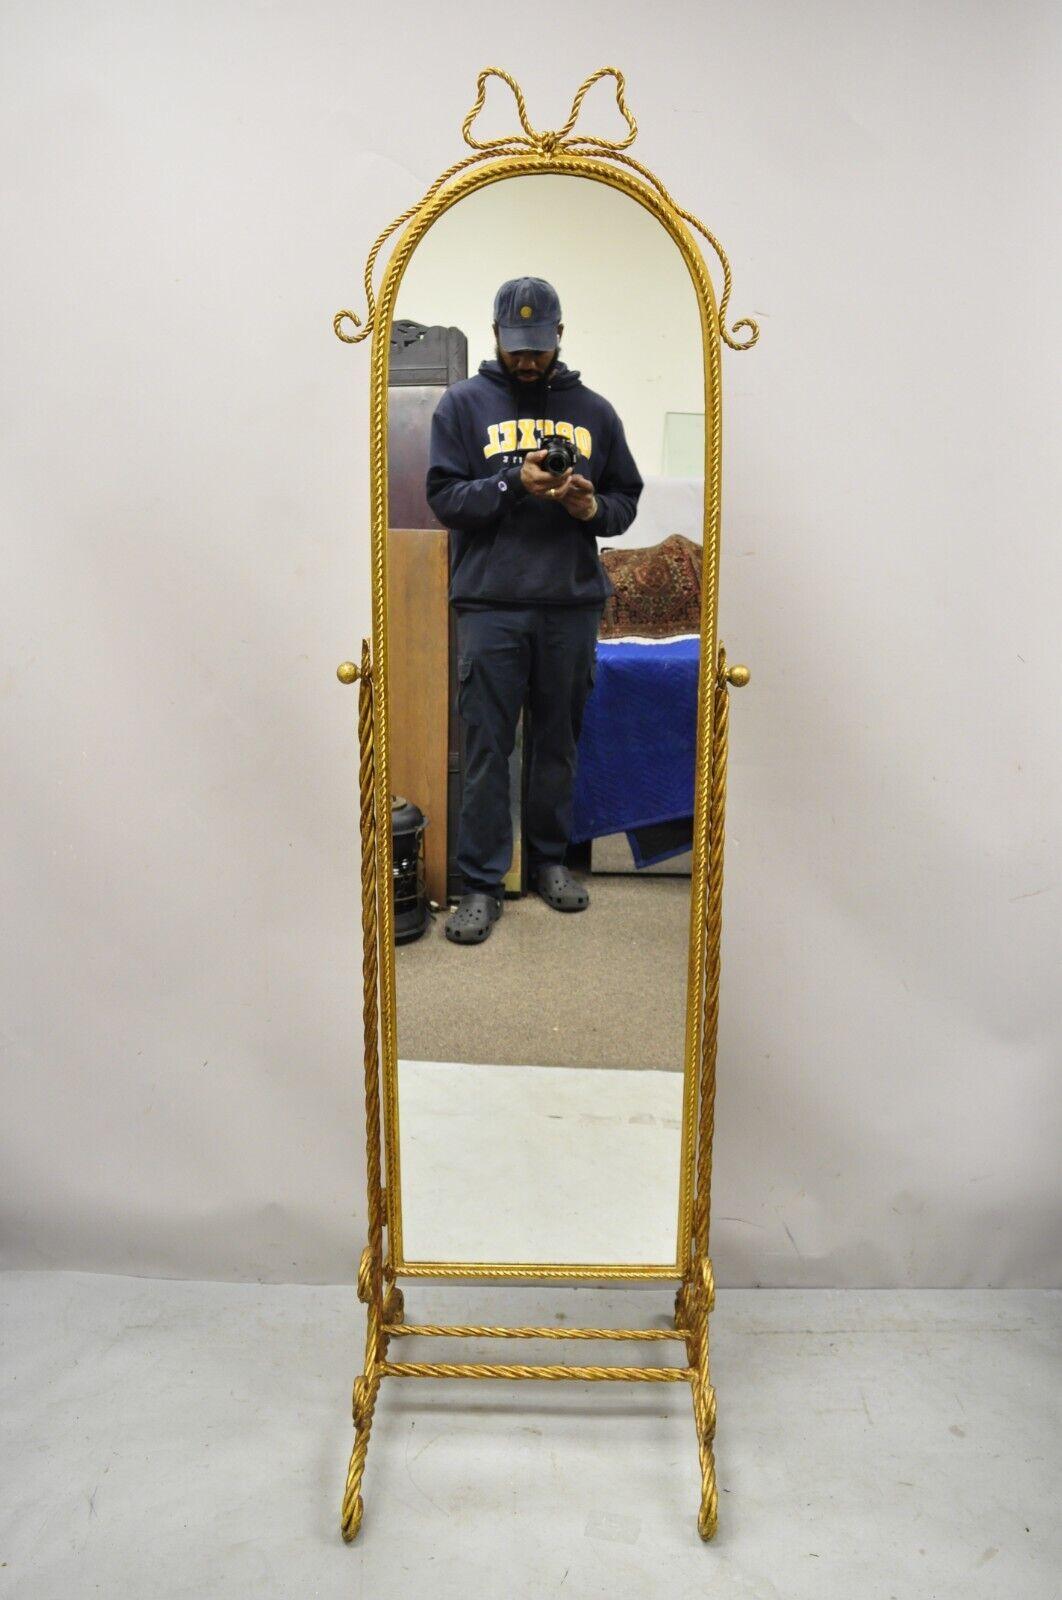 Italian Hollywood Regency Gold Gilt Iron Rope Cheval Standing Floor Mirror. Item features rope form iron frame, ribbon to crest of mirror, tall stately form. Circa Mid 20th Century. Measurements: 72.5